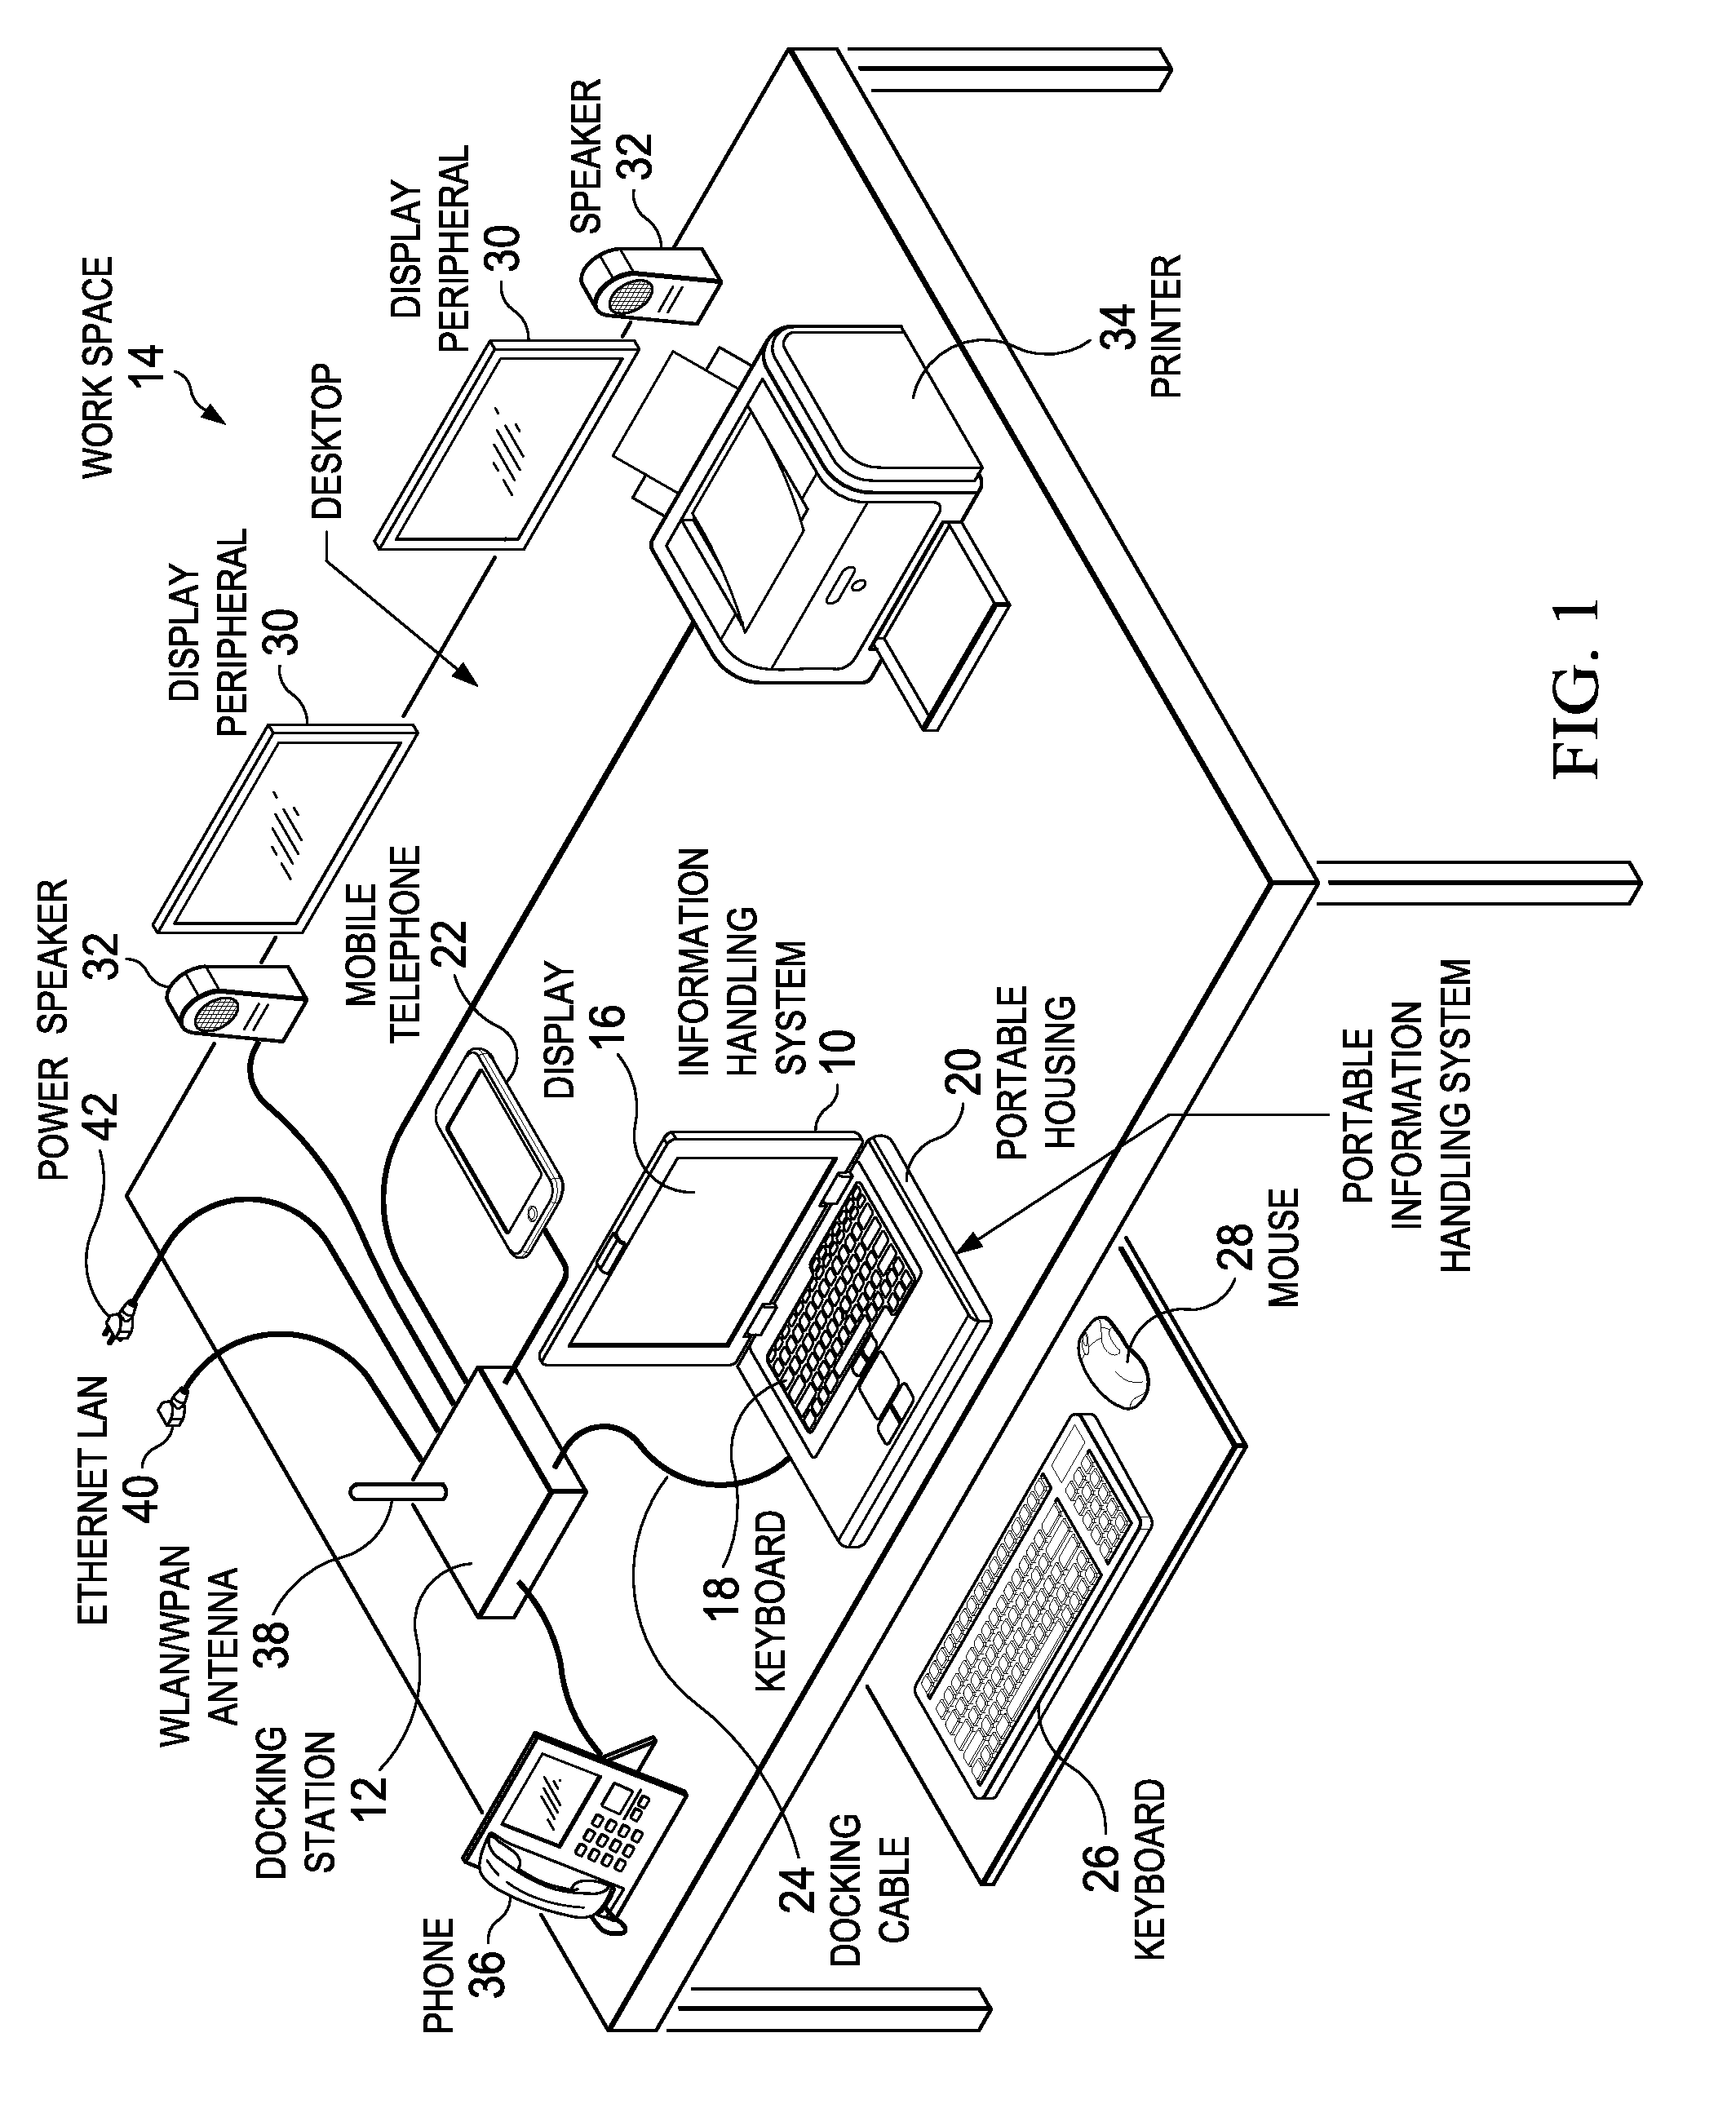 Information Handling System Docking with Coordinated Power and Data Communication